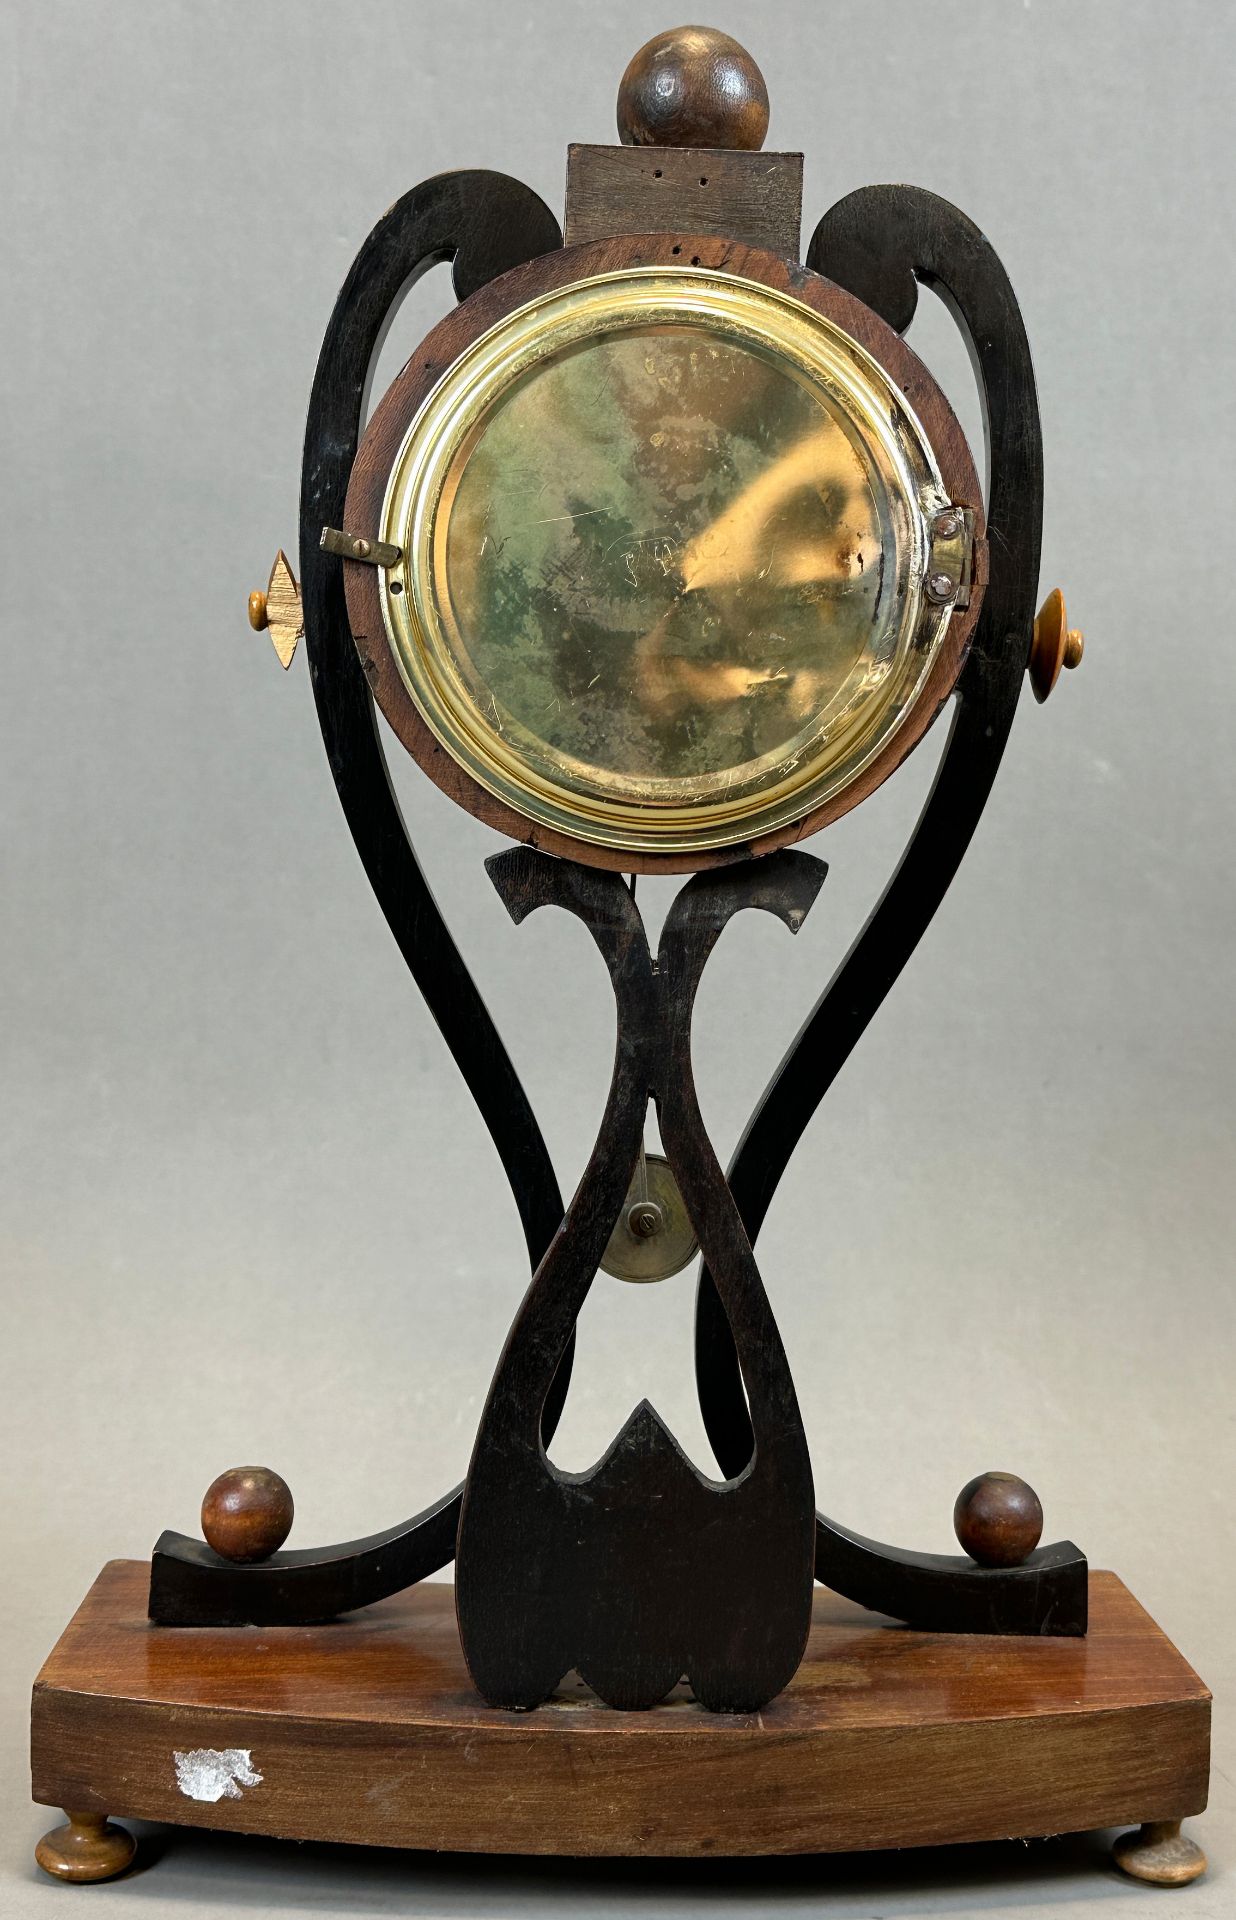 Antique mantel clock with striking mechanism and enamelled dial. 1st half of the 19th century. - Image 3 of 11